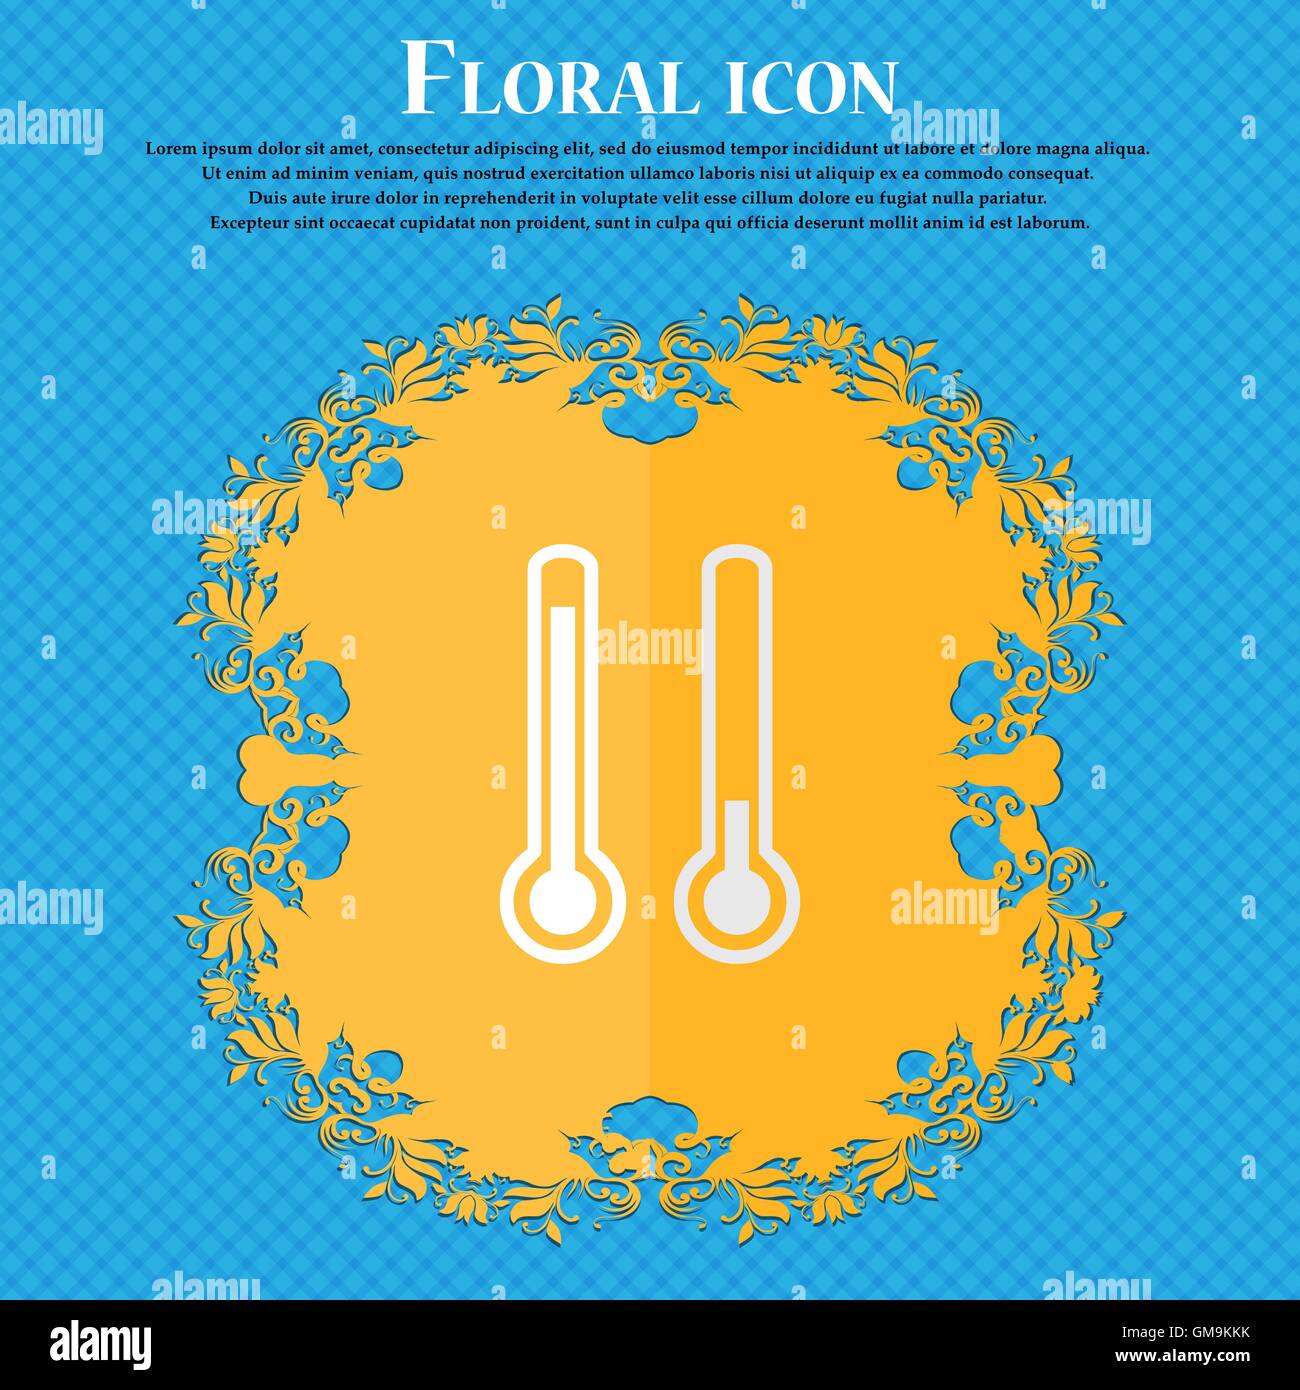 thermometer temperature. Floral flat design on a blue abstract background with place for your text. Vector Stock Vector